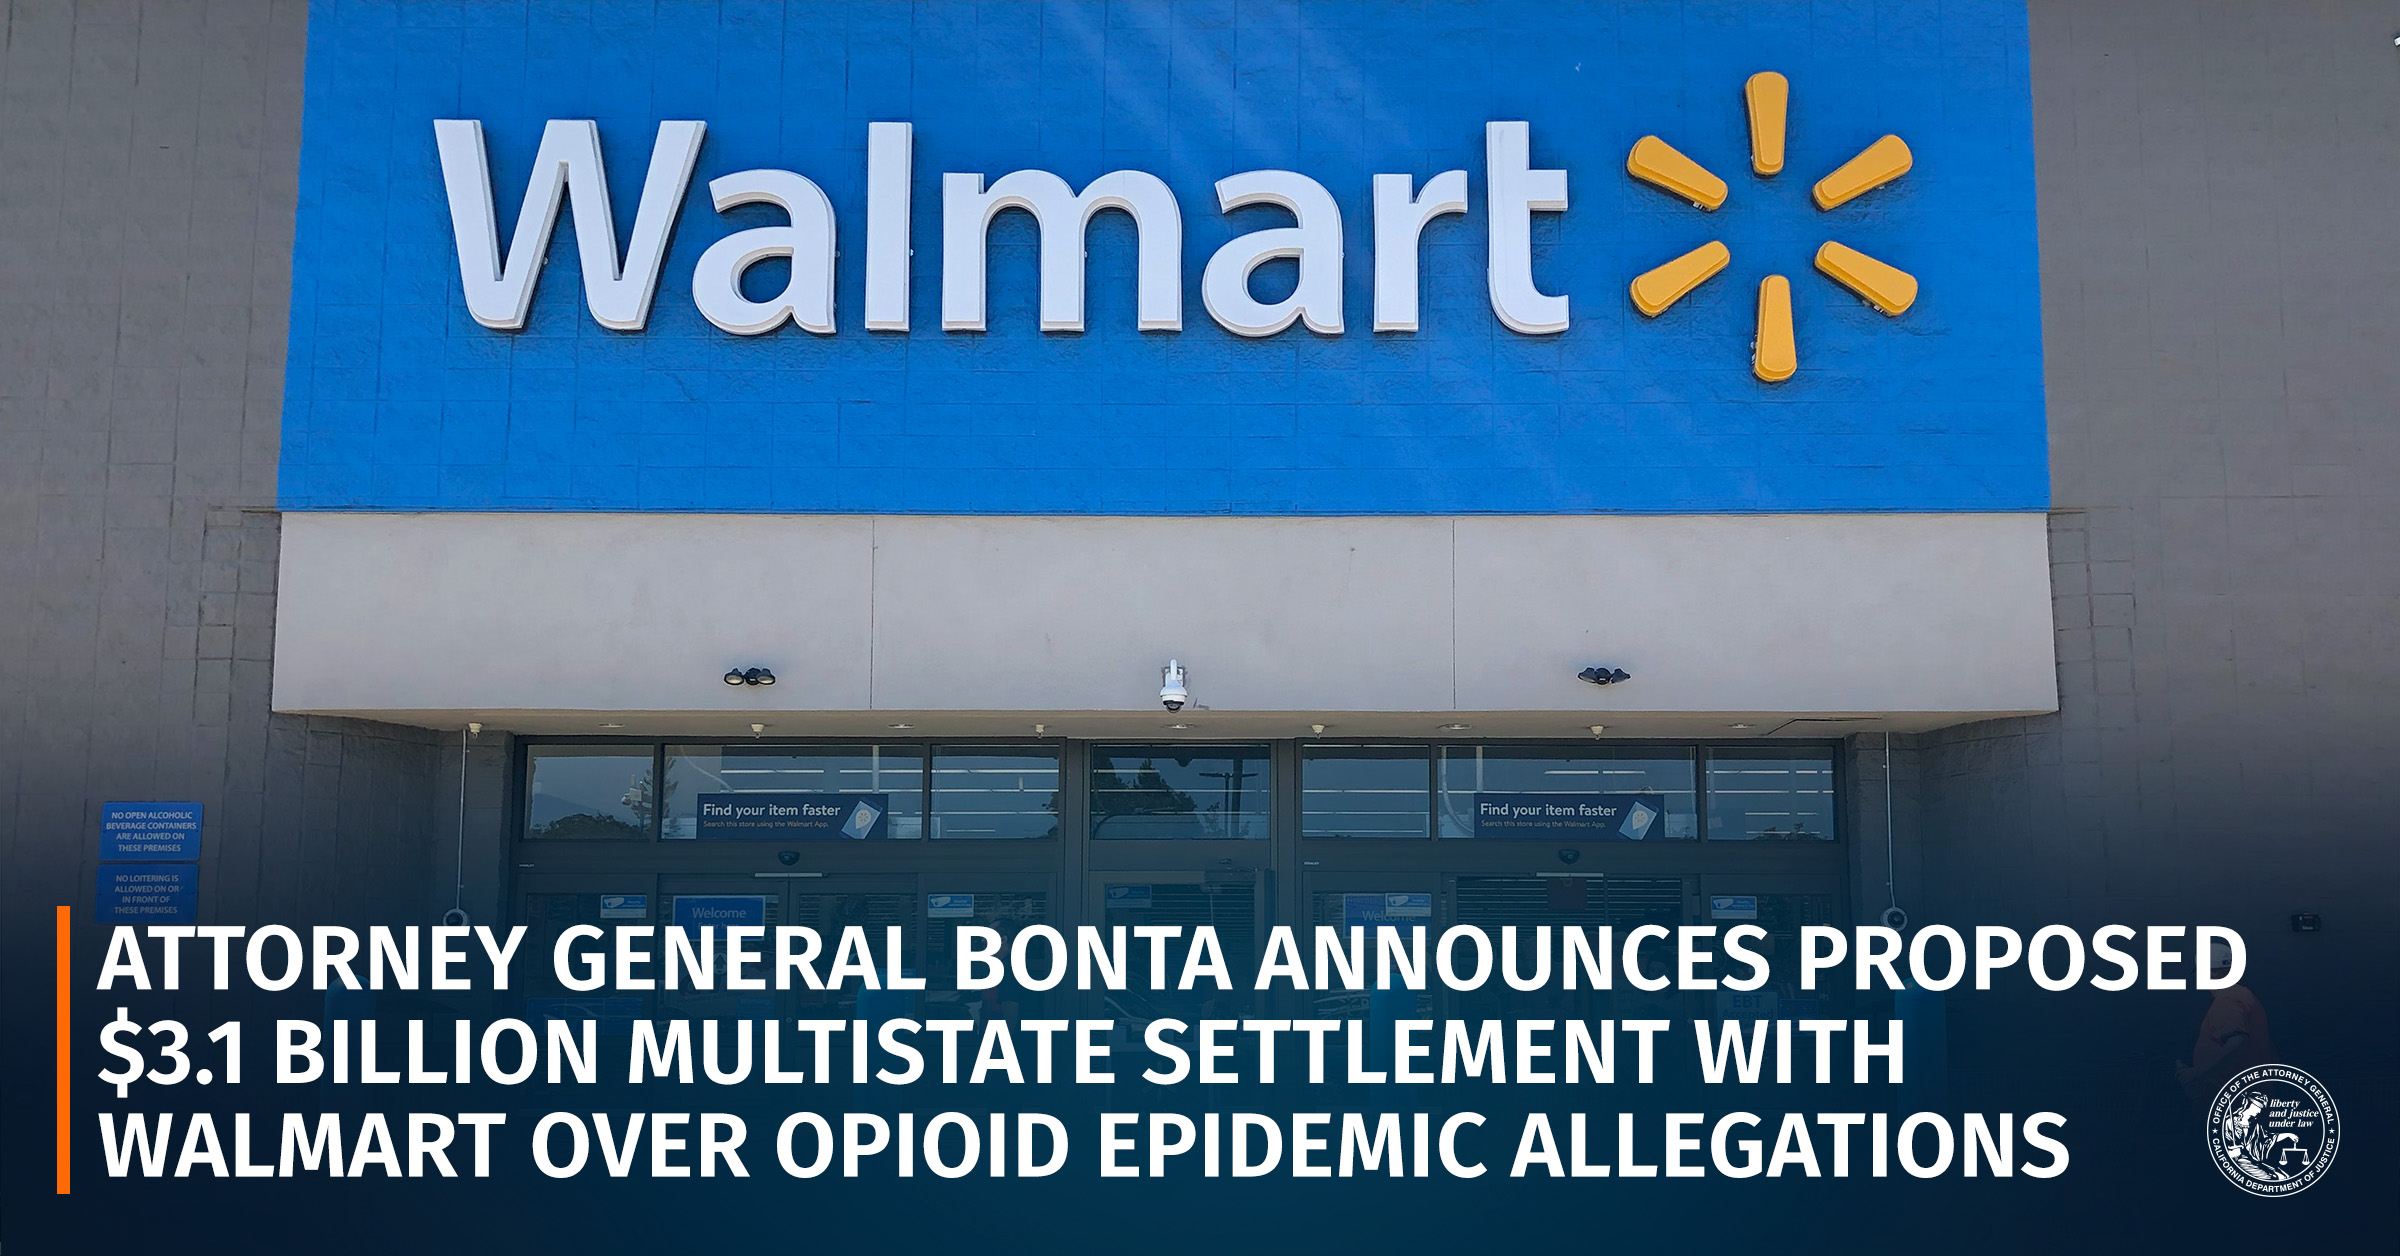 Attorney General Bonta Announces Proposed $3.1 Billion Multistate Opioid  Settlement with Walmart